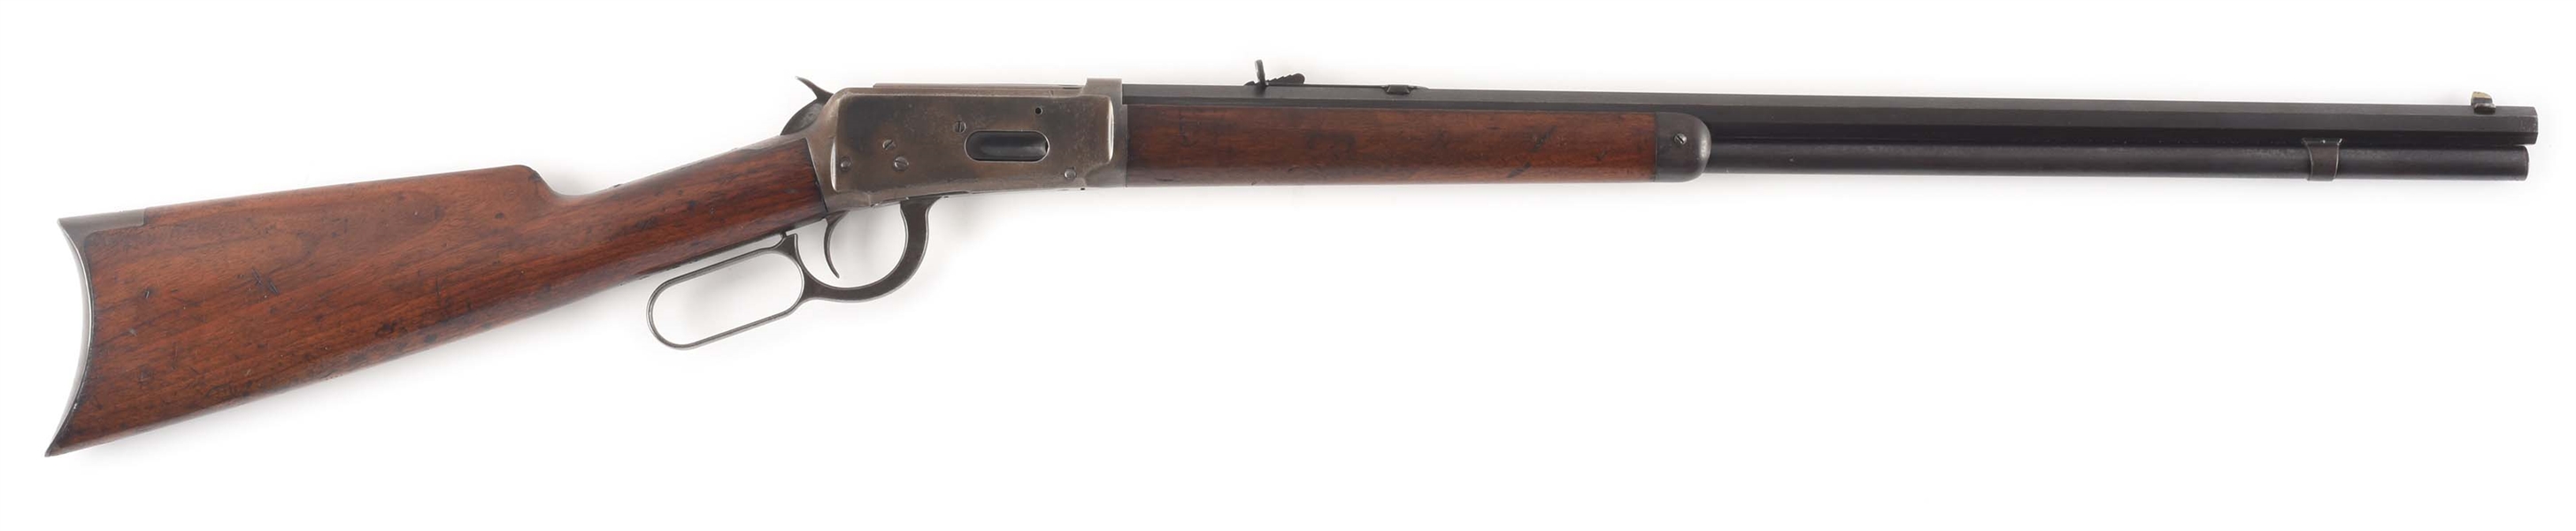 (A) RARE 10 OCLOCK SCREW 1ST YEAR PRODUCTION WINCHESTER MODEL 1894 LEVER ACTION RIFLE (1894).